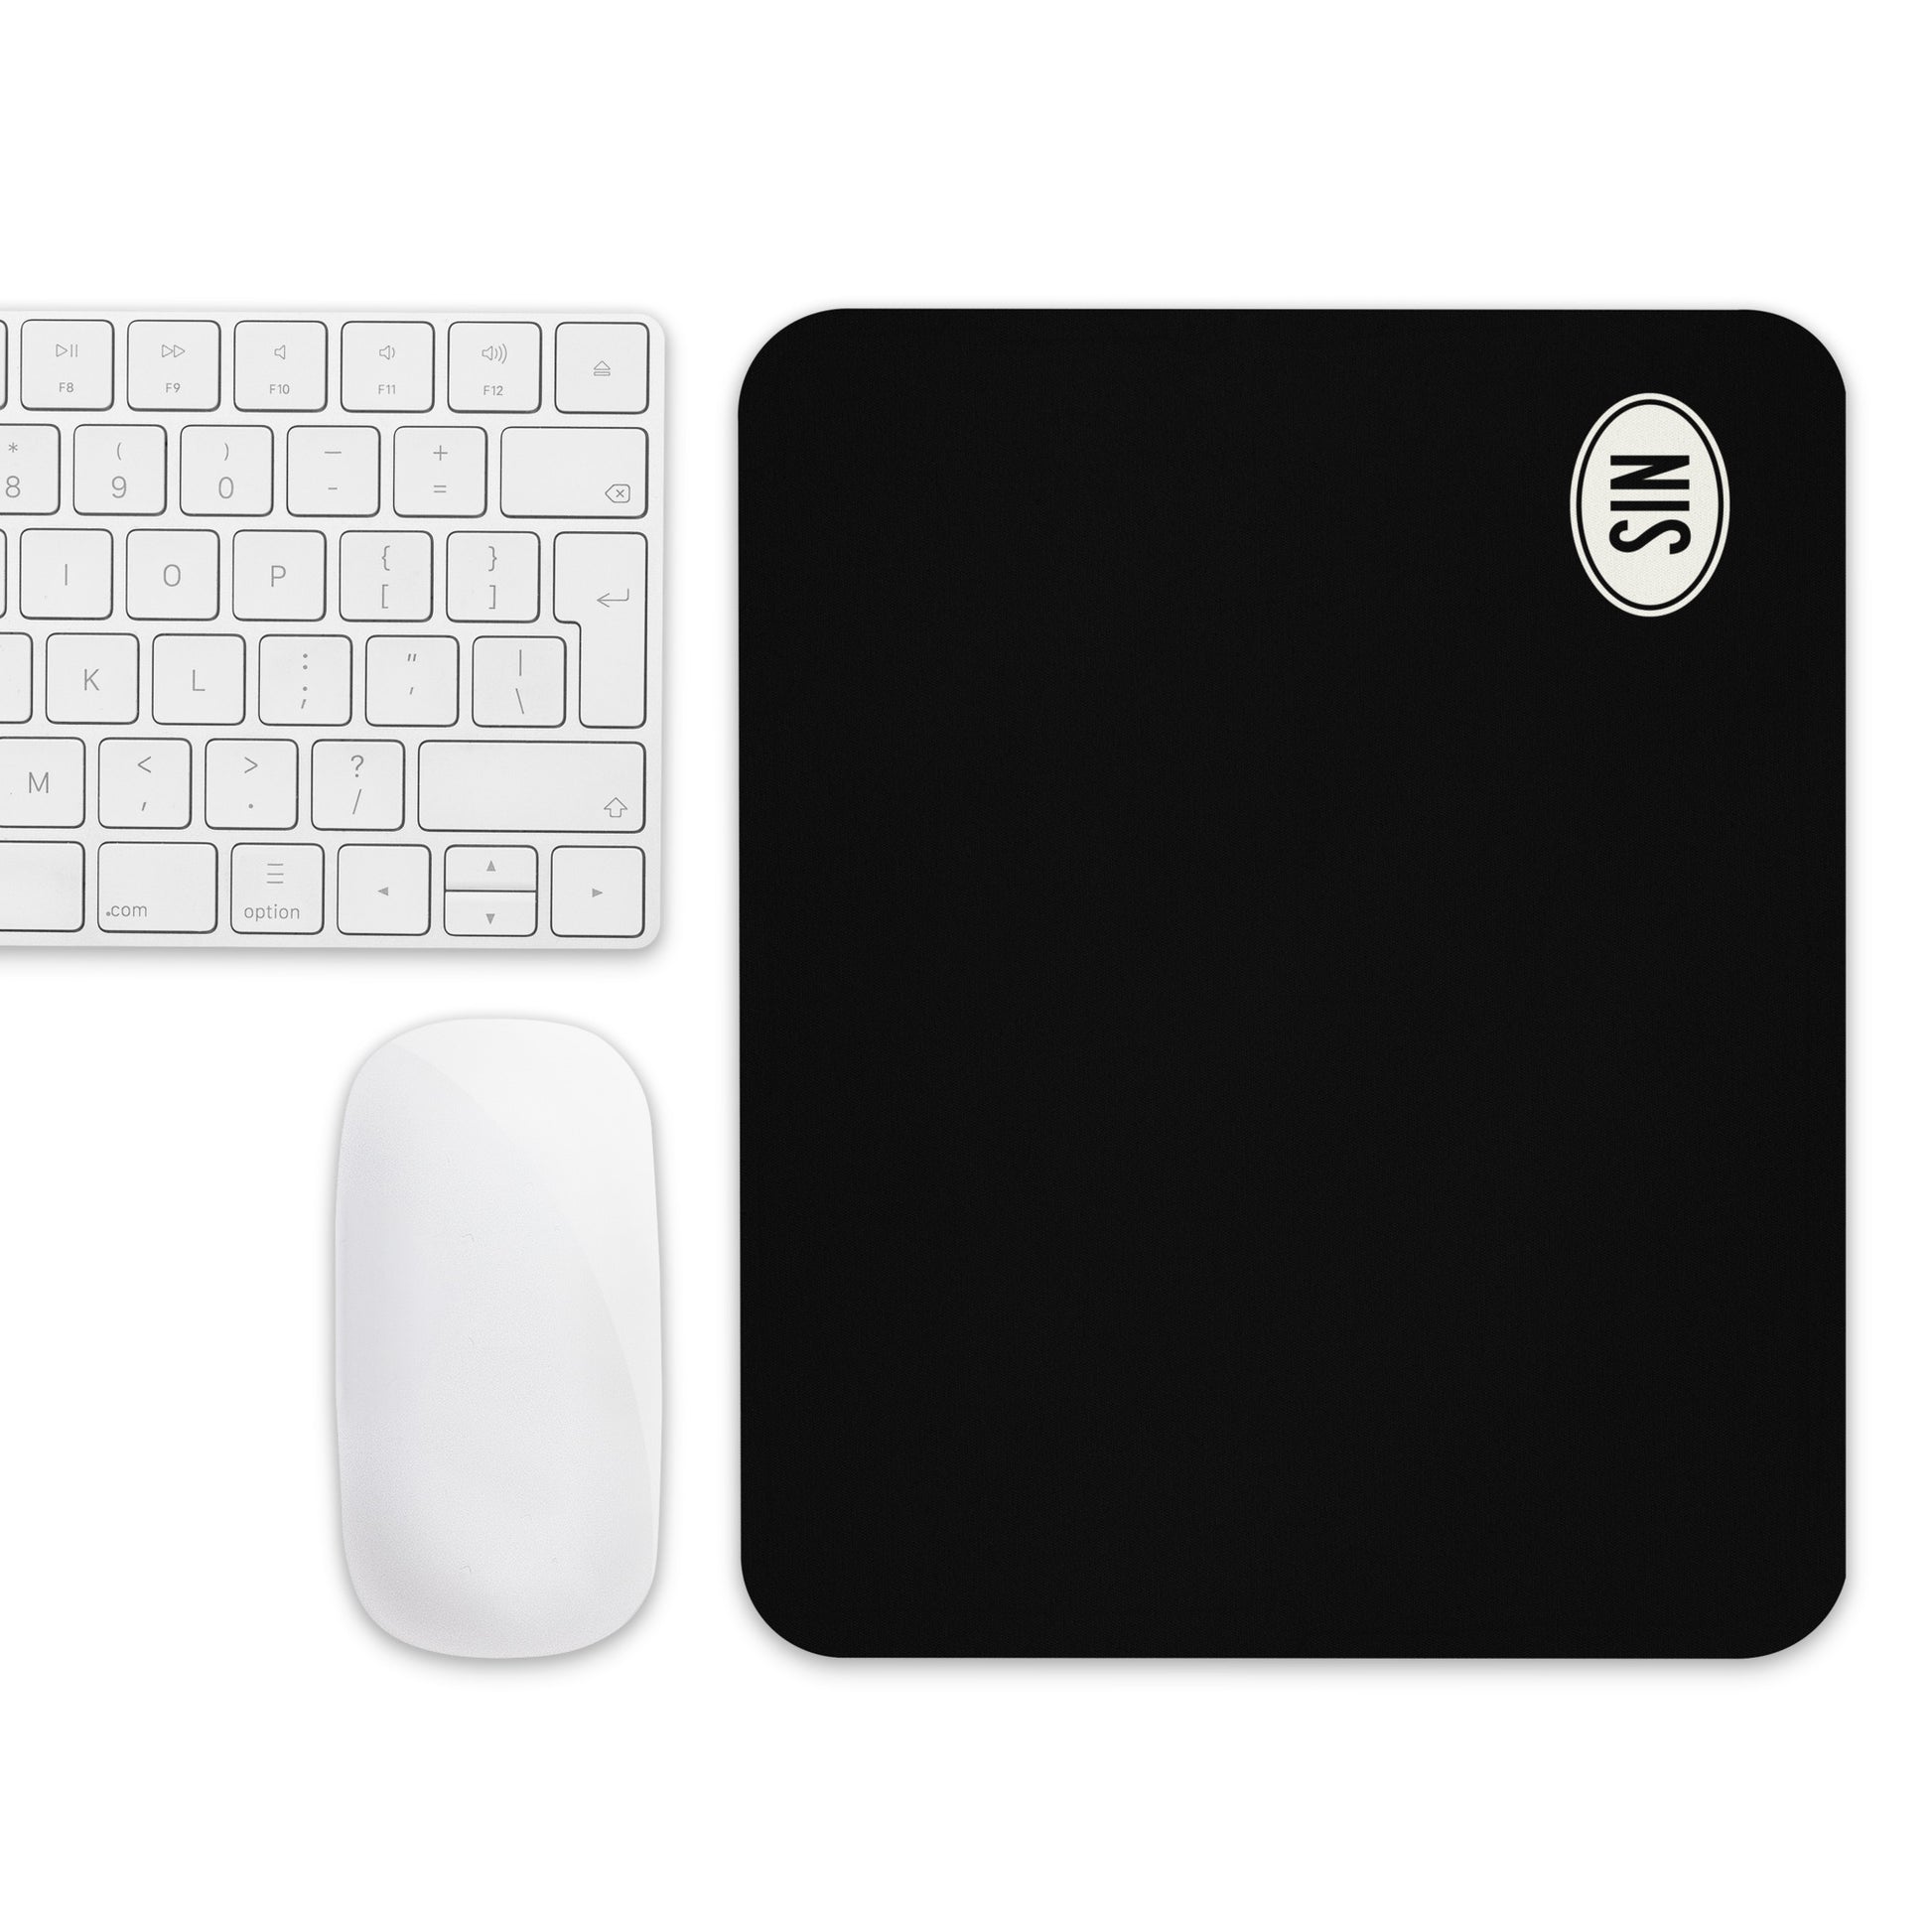 Unique Travel Gift Mouse Pad - White Oval • SIN Singapore • YHM Designs - Image 04